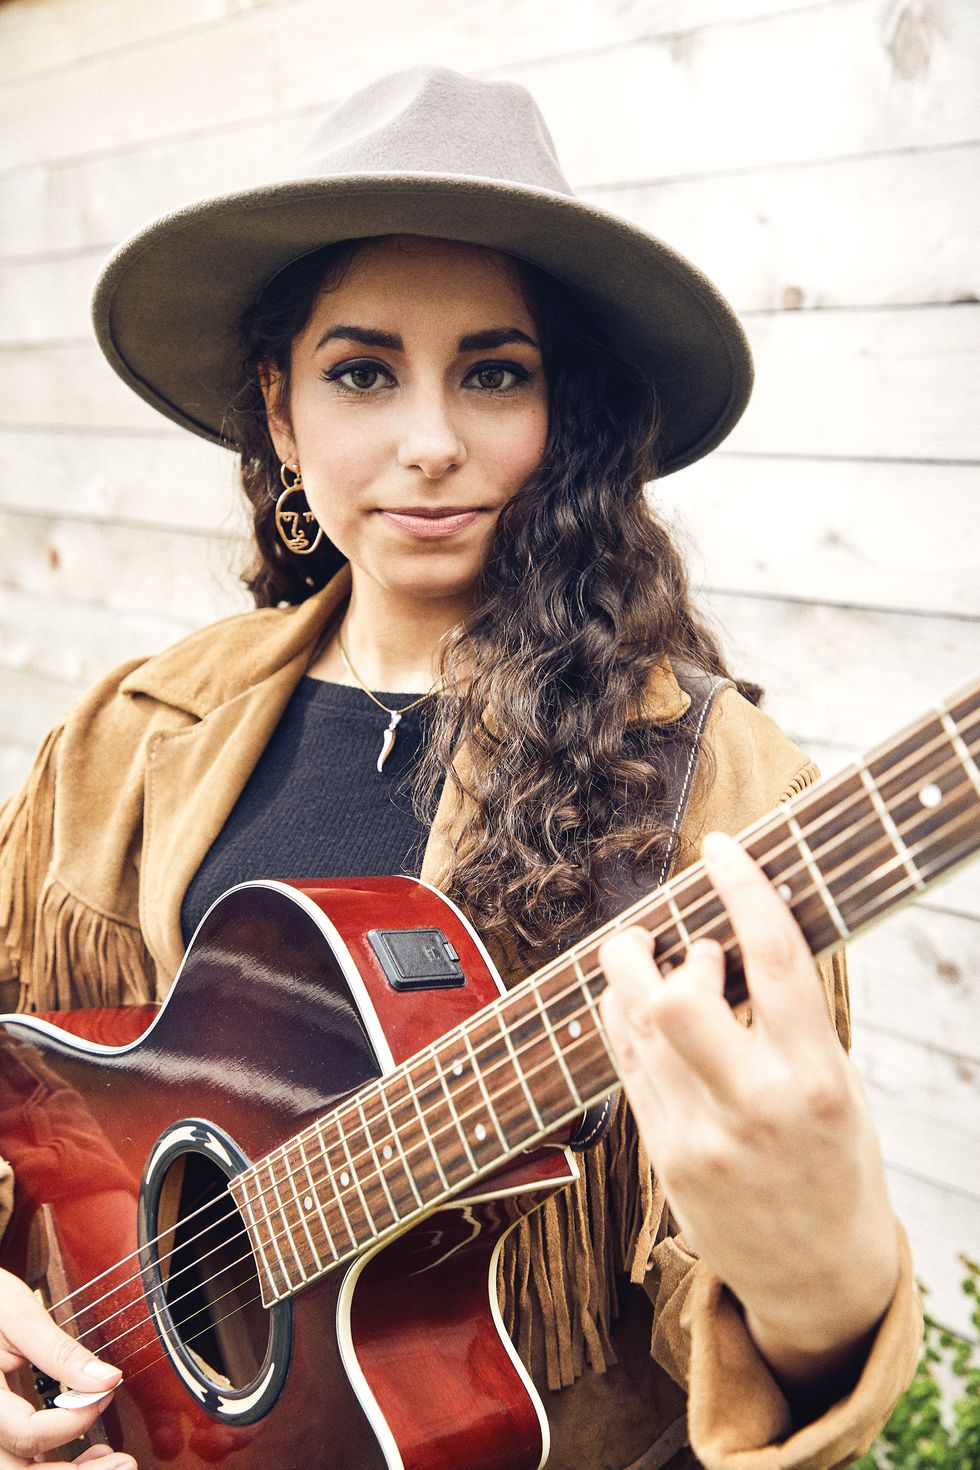 Issues-Driven Folk Singer-Songwriter Pascali Provokes in English and Italian